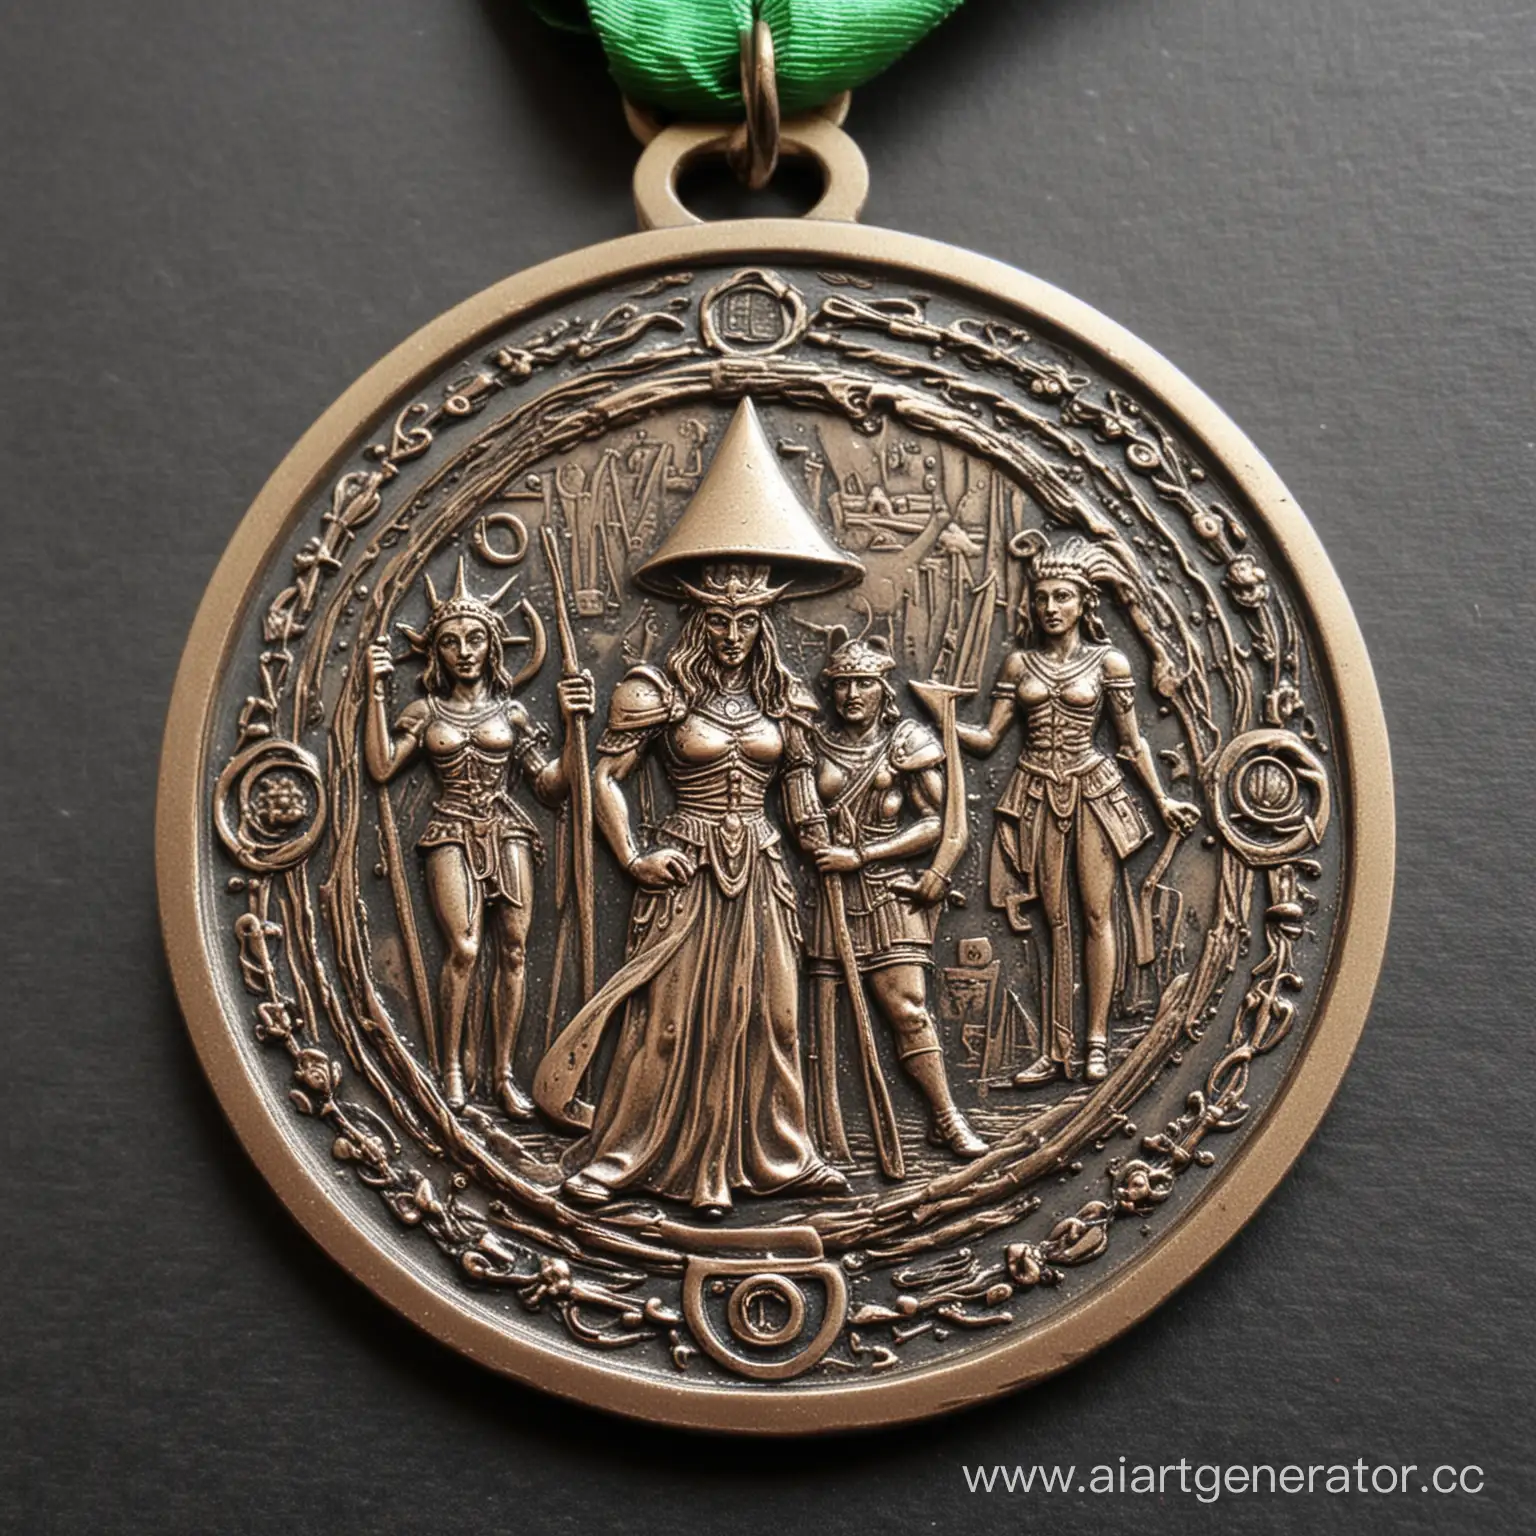 A medal of metal for mettle, Land of Oz, Wizard, Saturn, Hecate